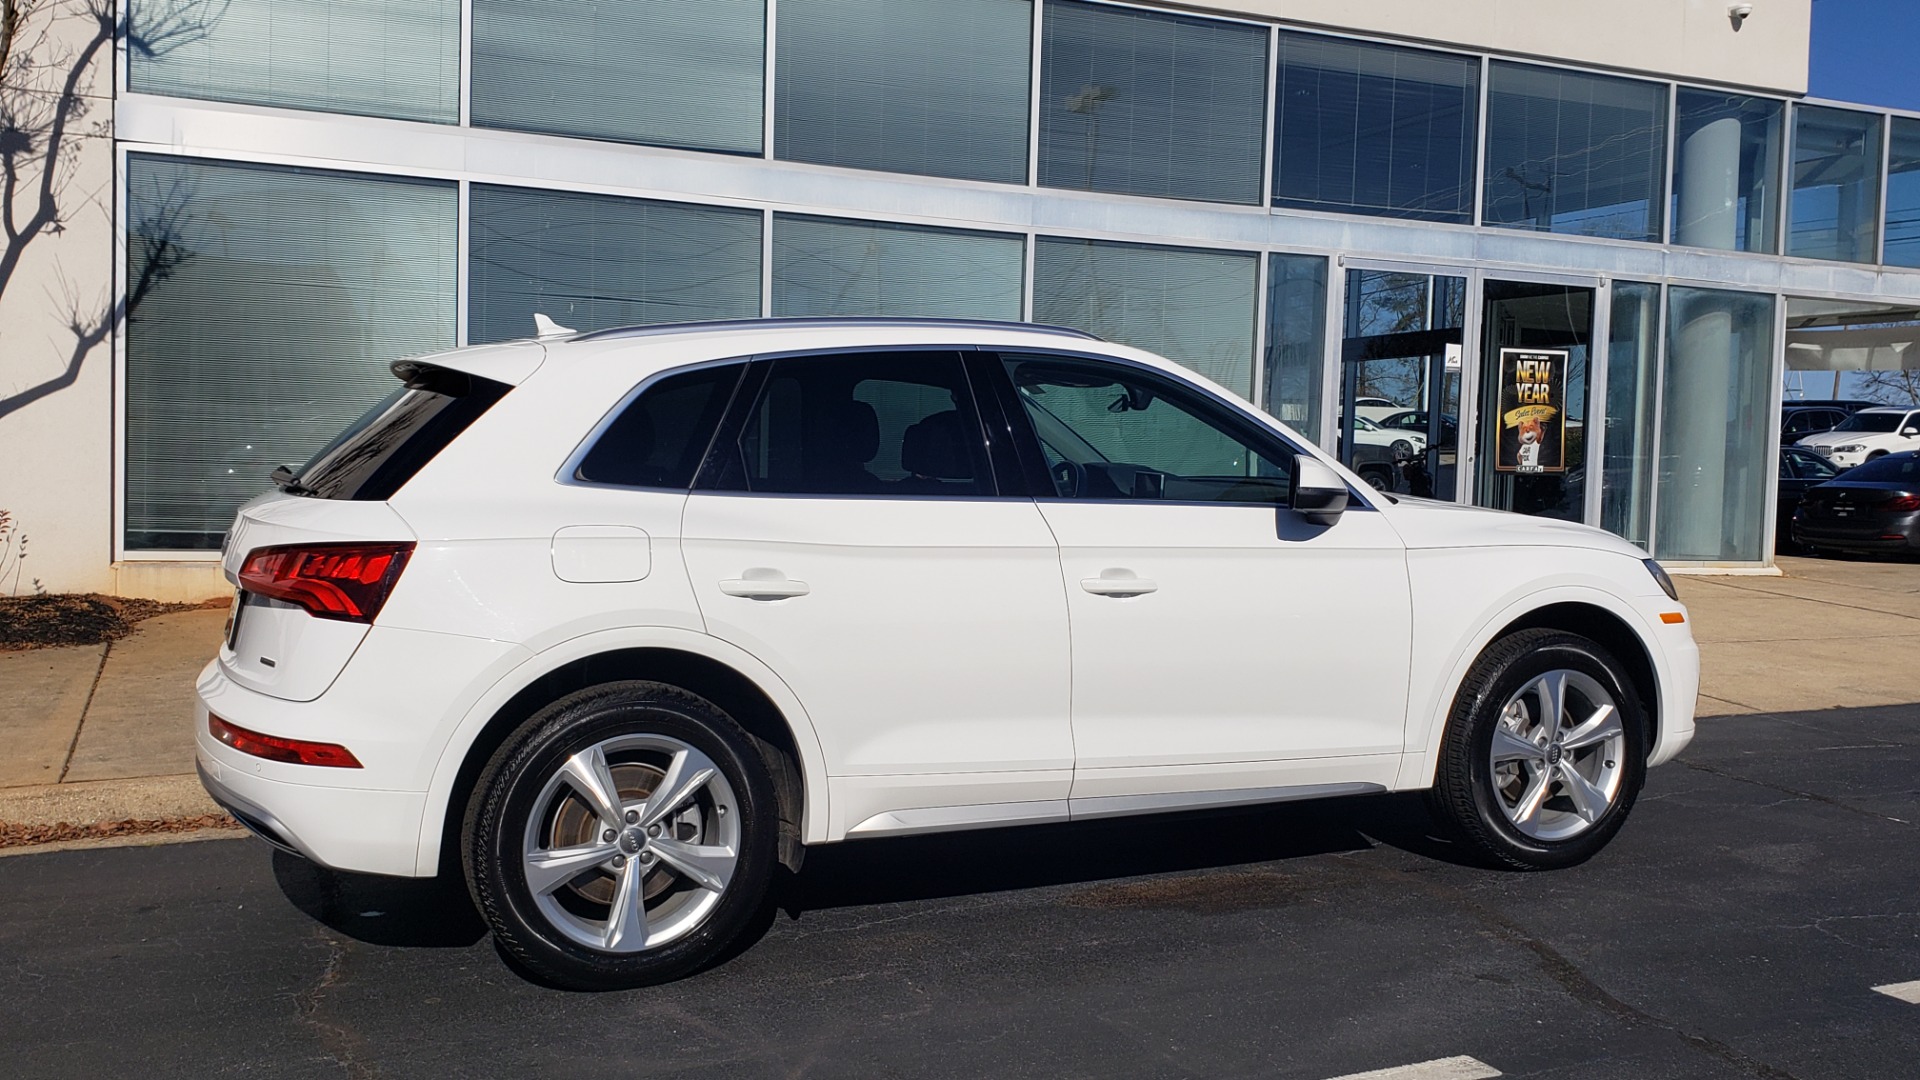 Used 2019 Audi Q5 PREMIUM PLUS 2.0L / AWD / NAV / PANO-ROOF / DRVR ASST / REARVIEW for sale $42,395 at Formula Imports in Charlotte NC 28227 7